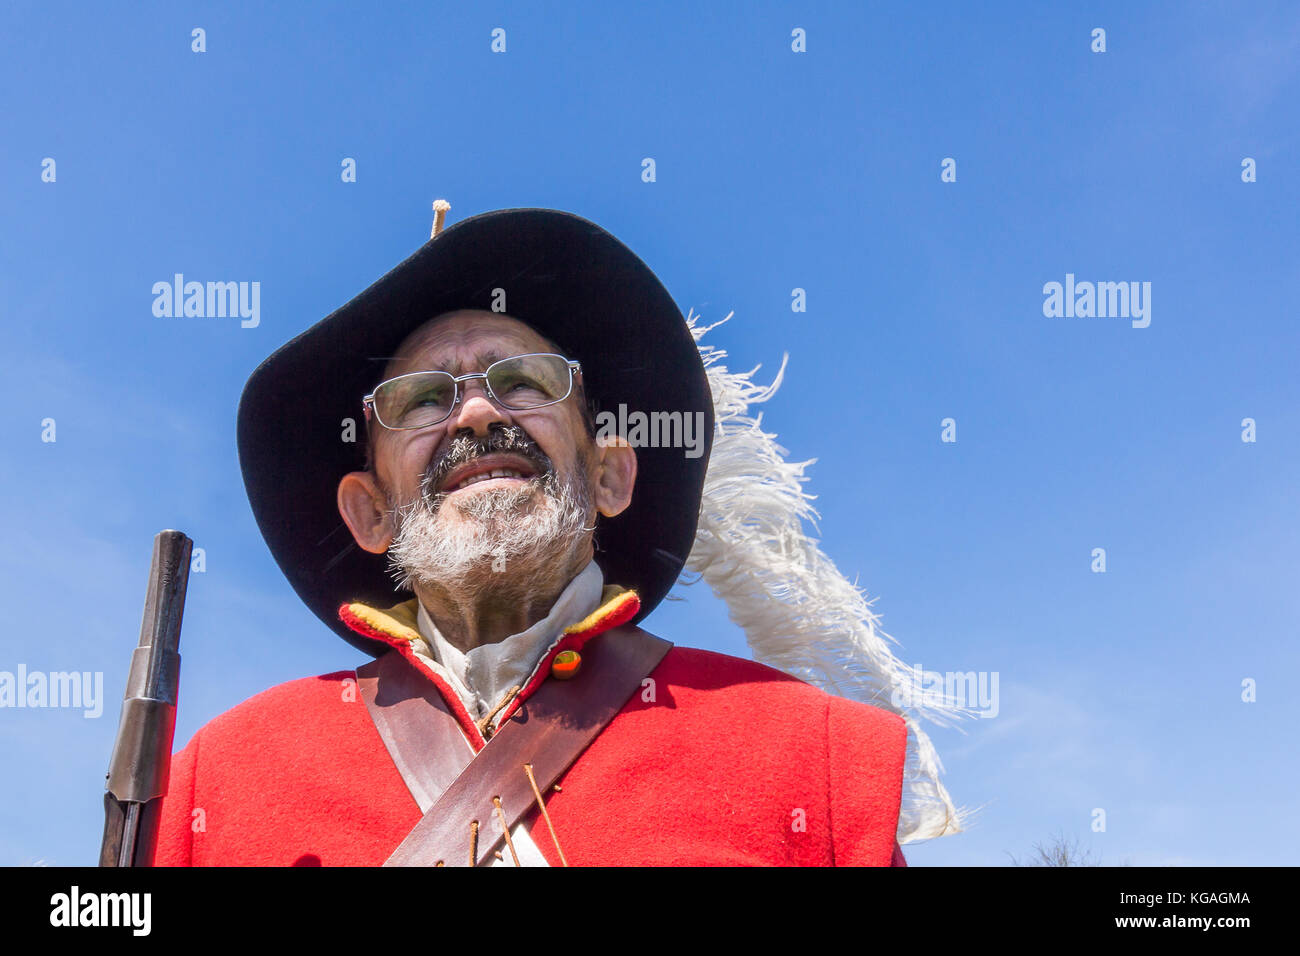 Old Swedish soldier from the 1600s with a rifle during a battle in Denmark, May 21, 2017 Stock Photo